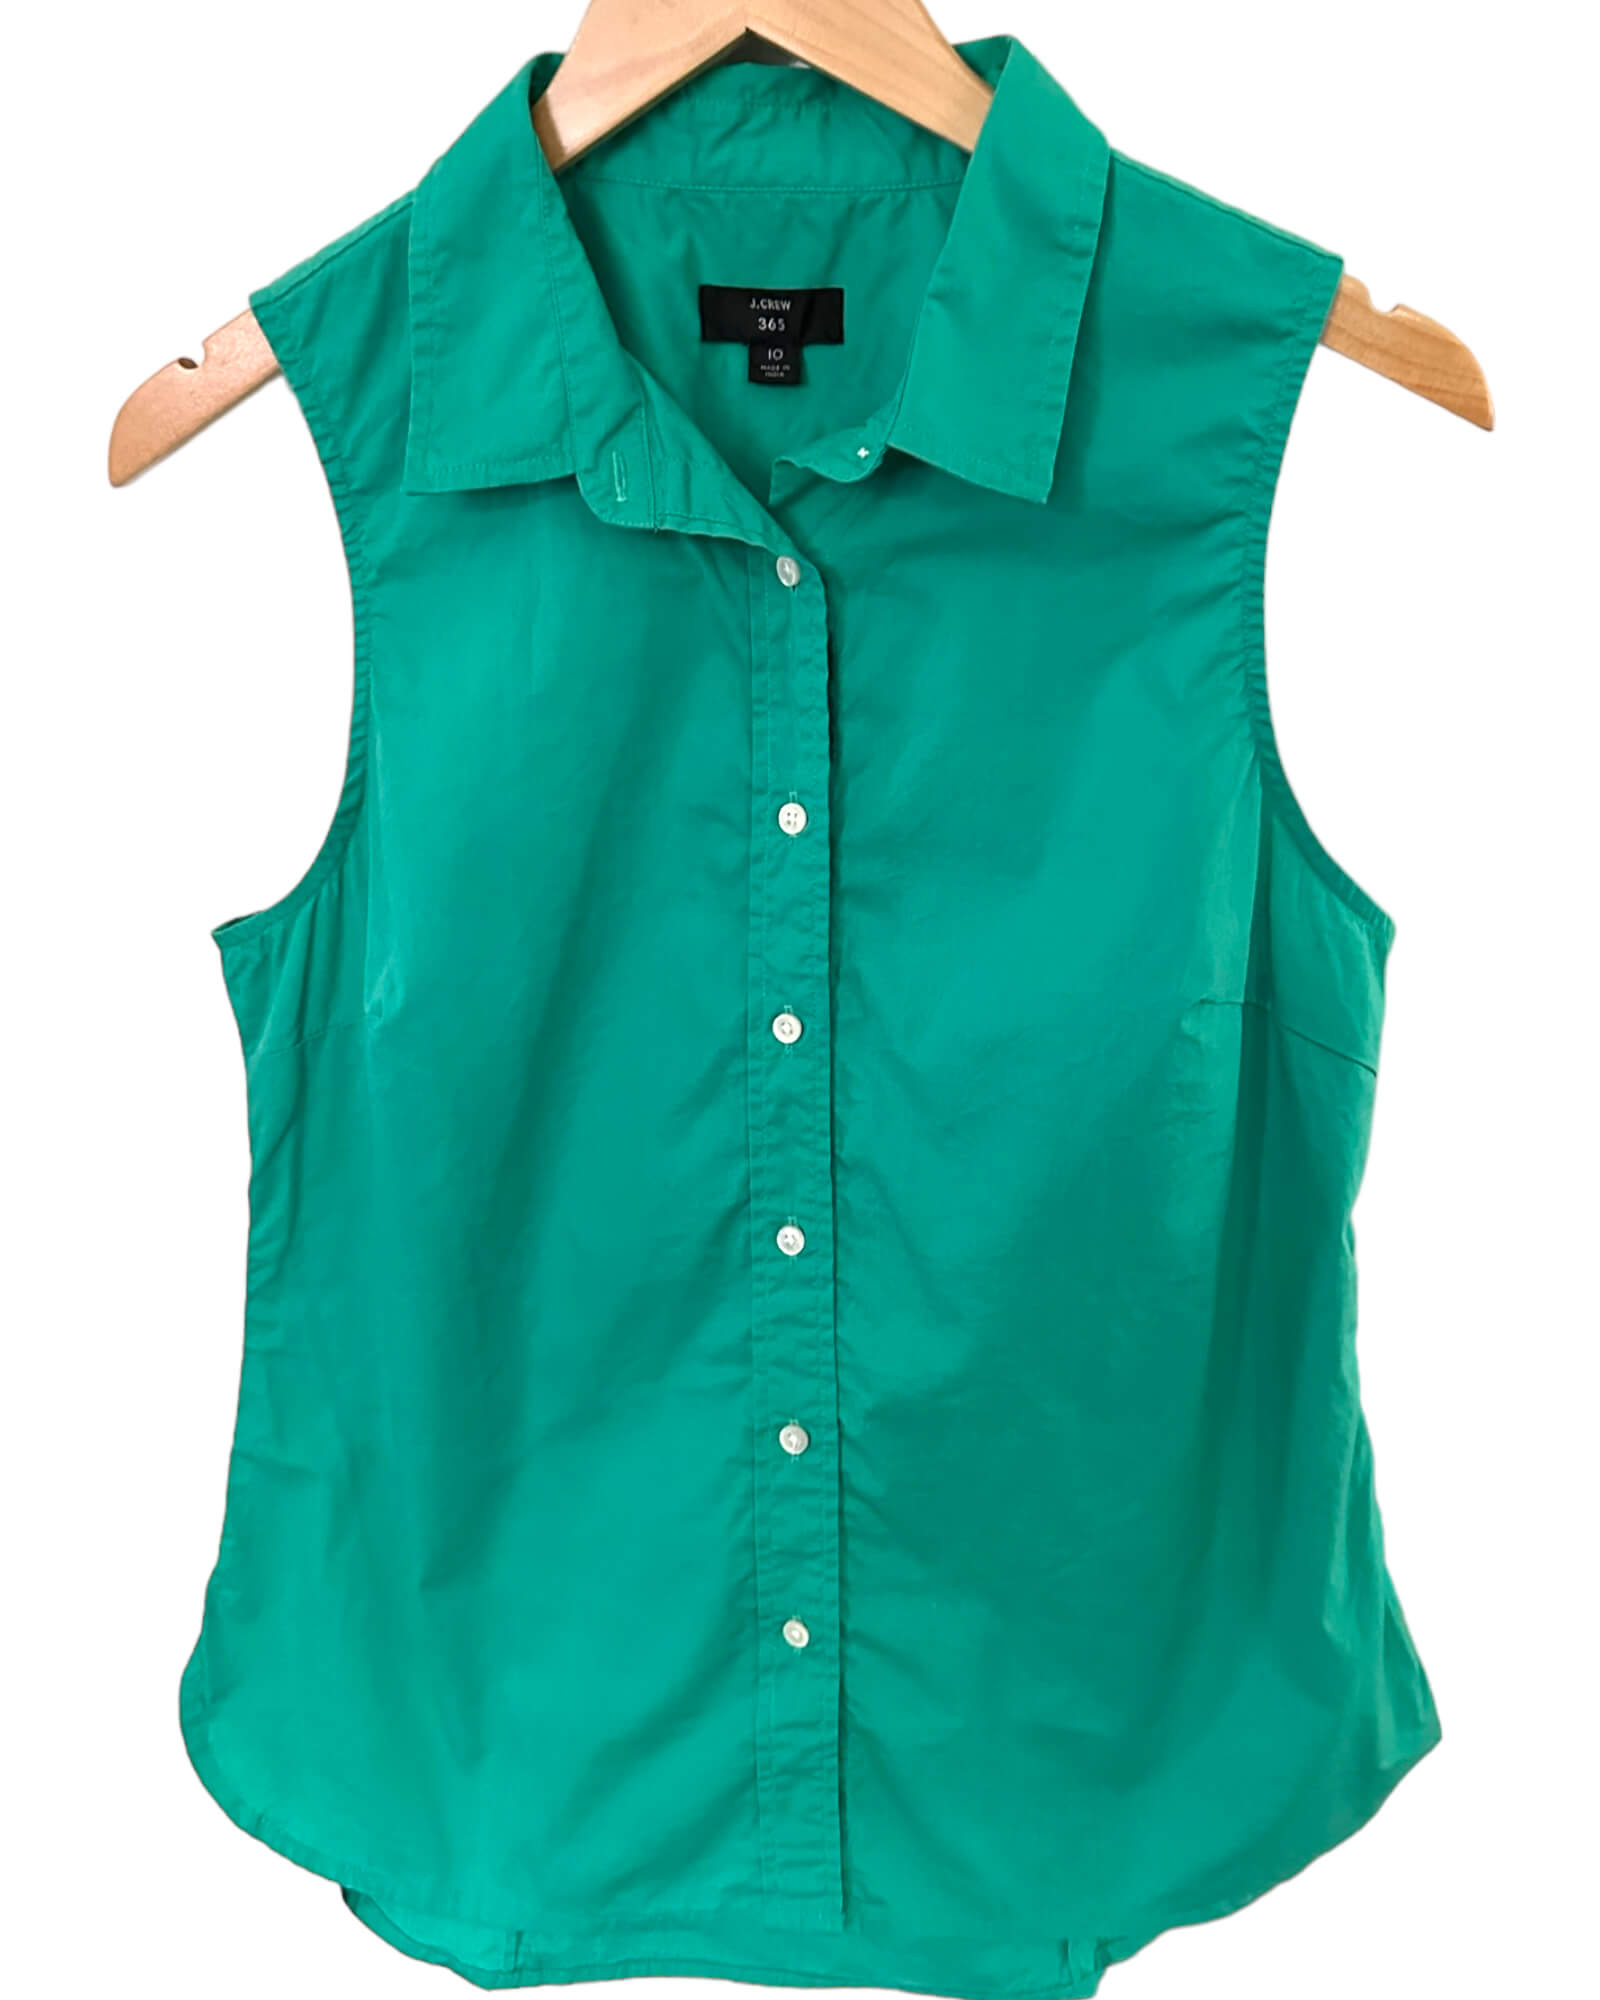 The Classic Sleeveless Button Front Shirt